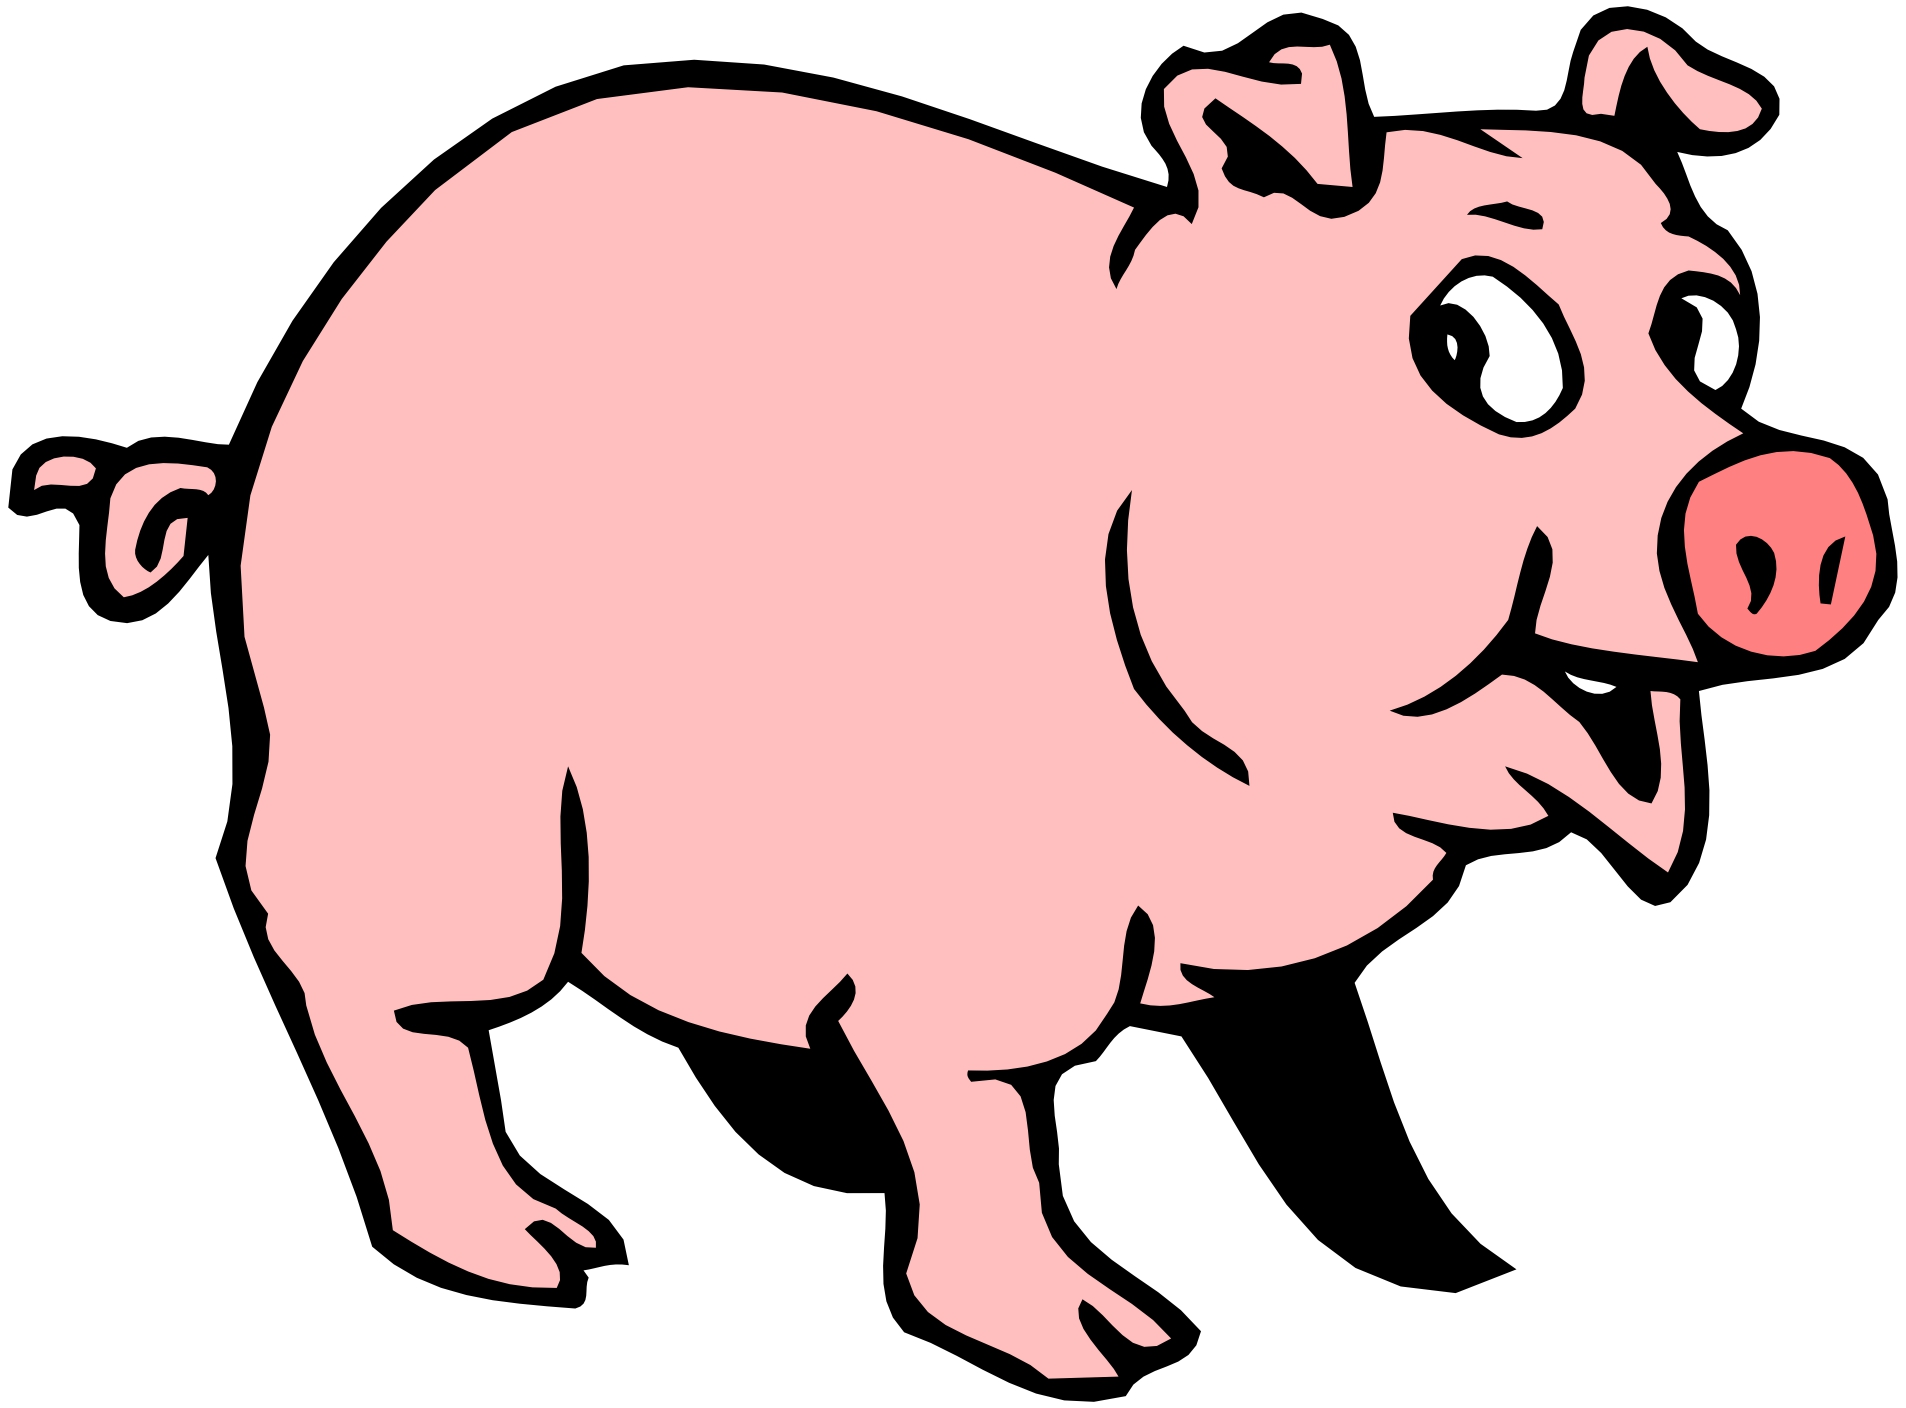 Cartoon Pig Images Cute And Funny Pictures Of Pigs In - vrogue.co